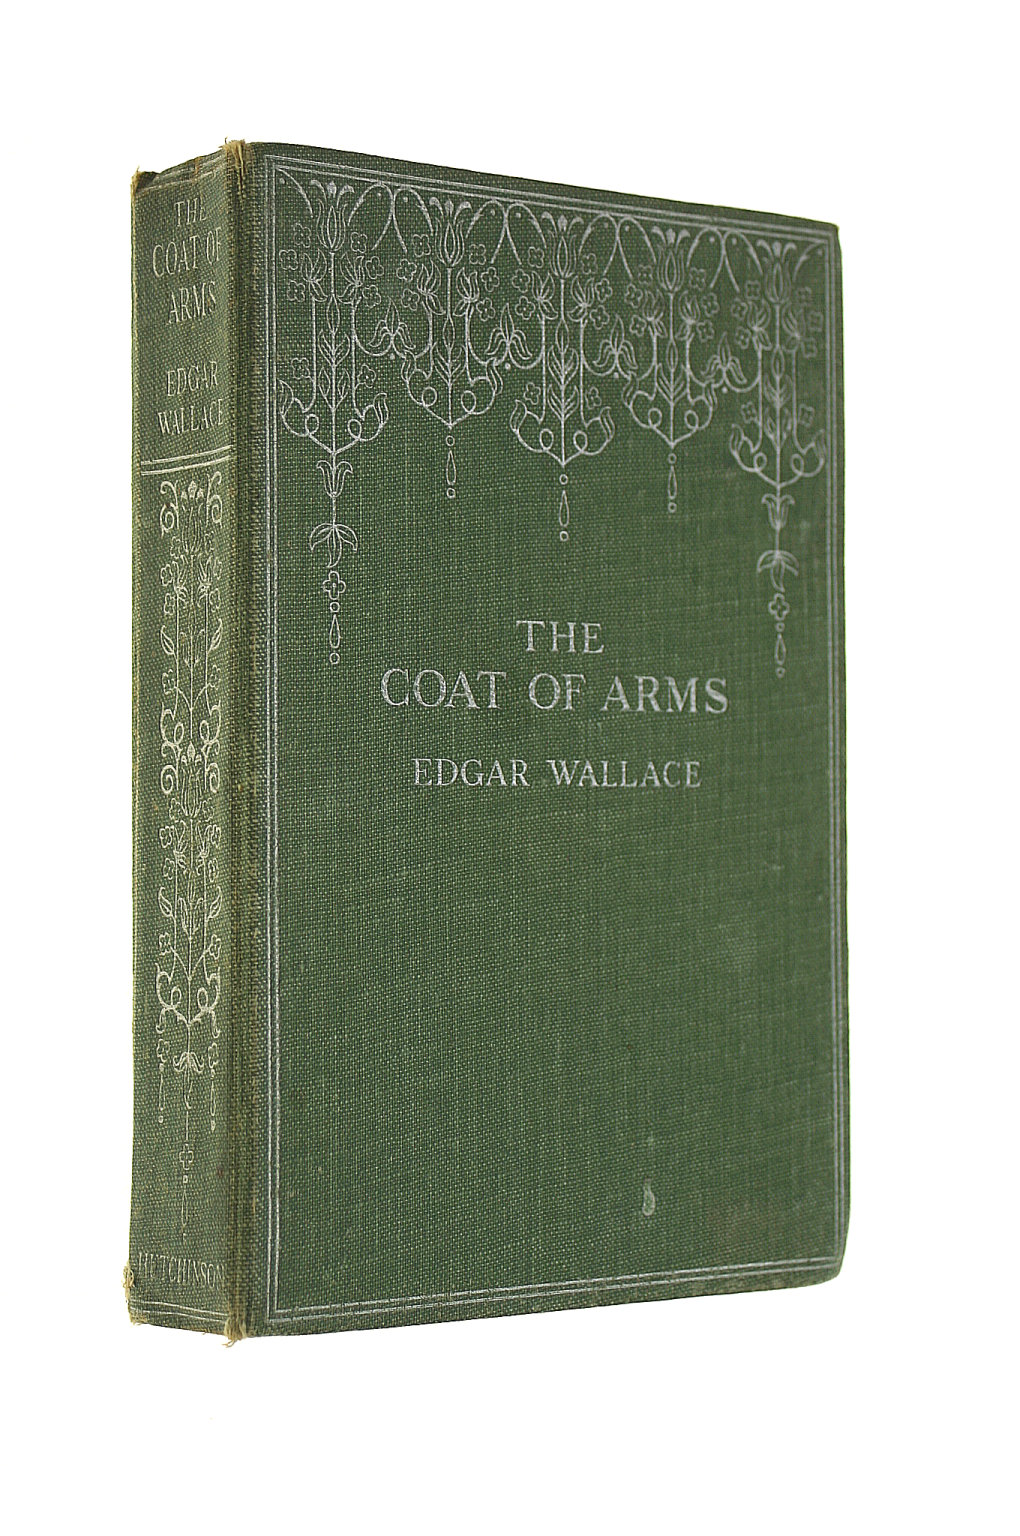 WALLACE, EDGAR. - The Coat of Arms